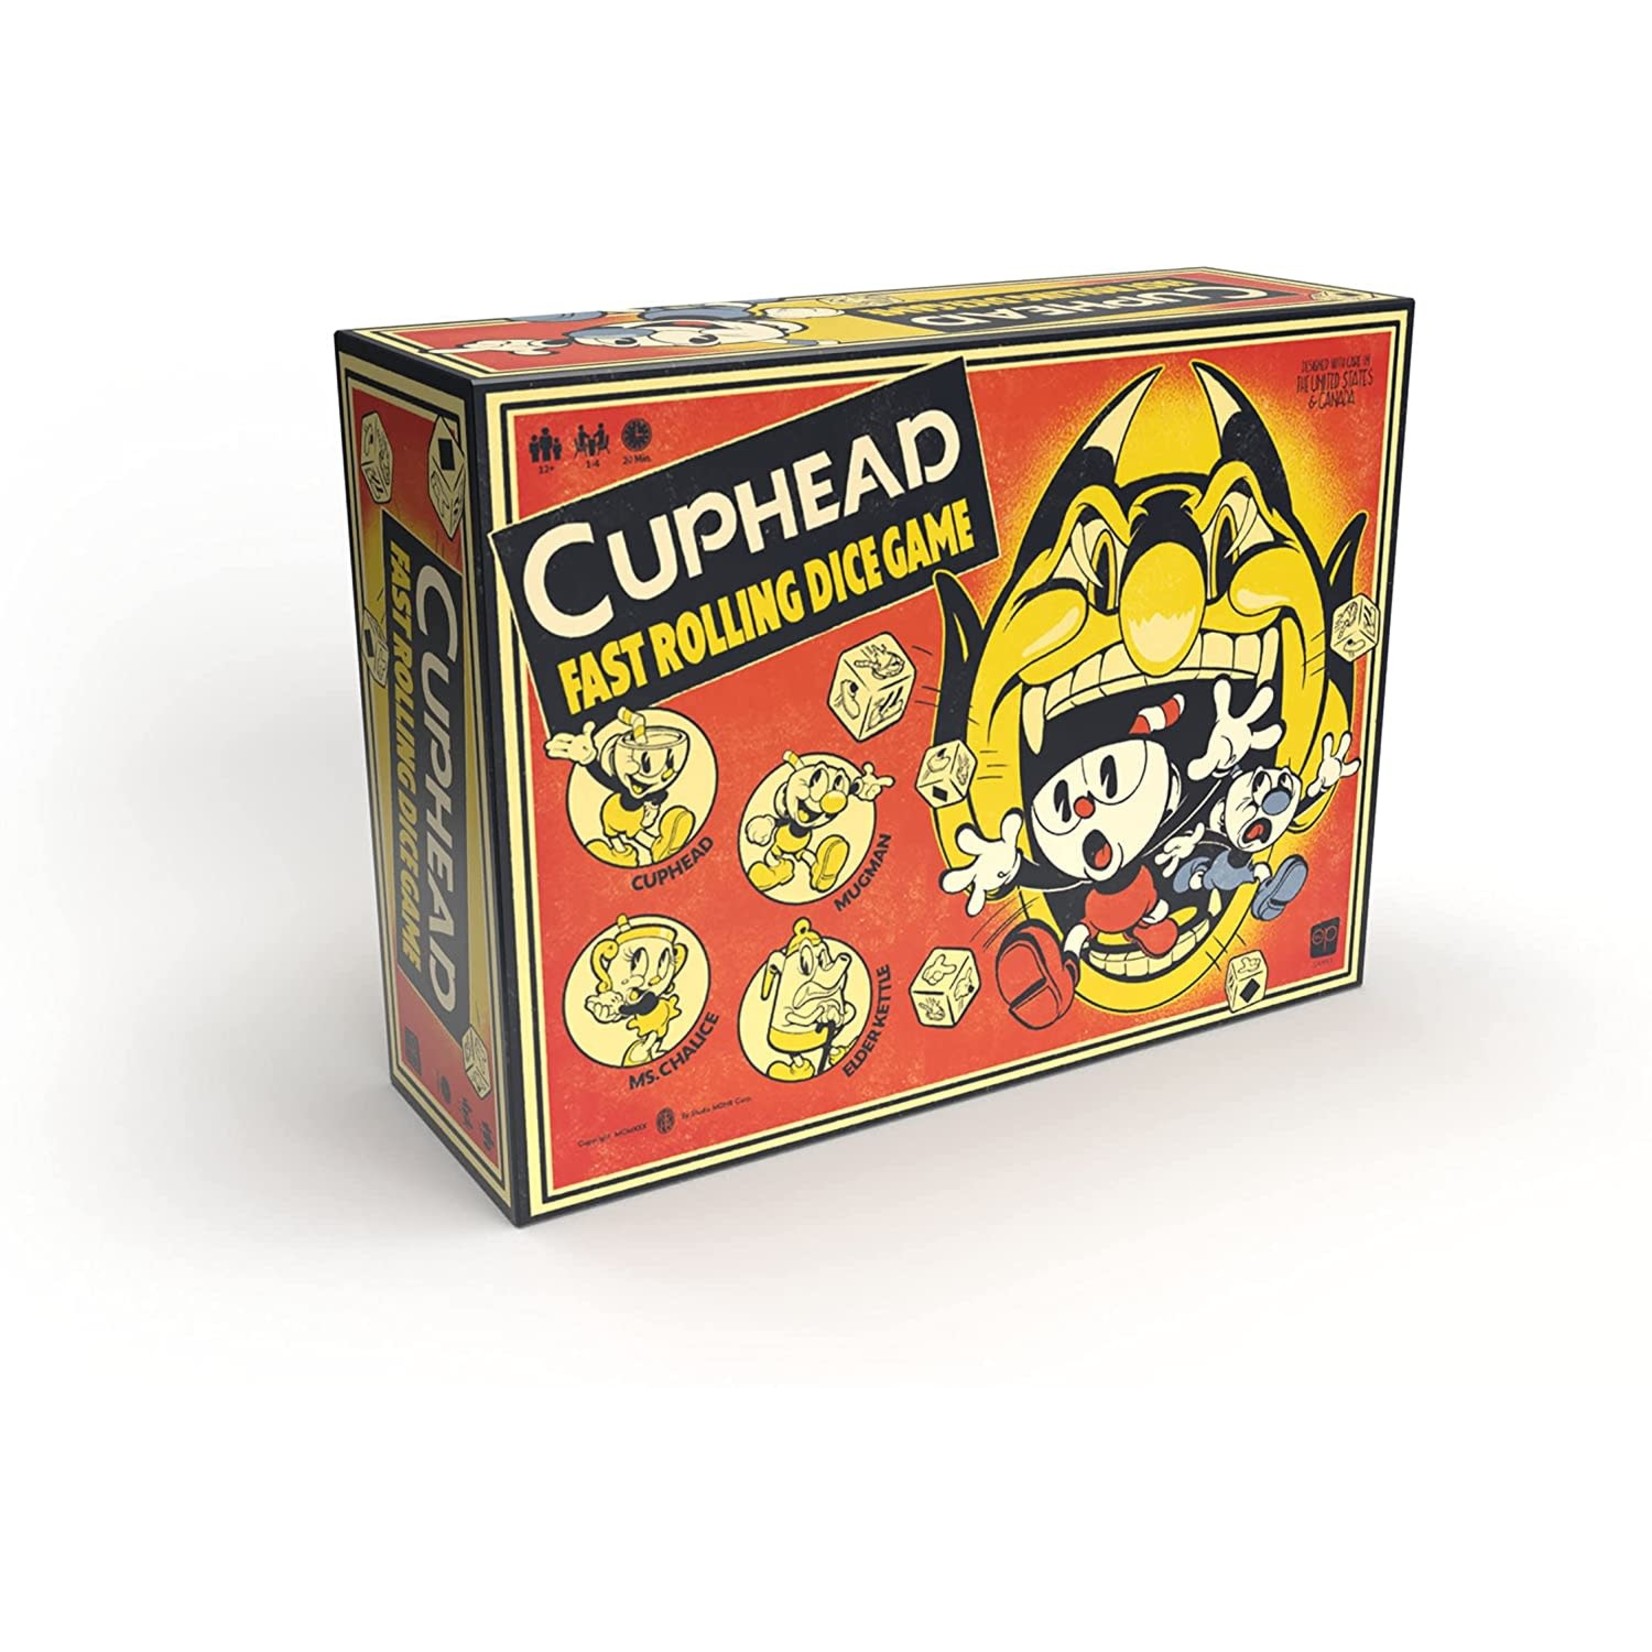 The Op Cuphead Fast Rolling Dice Game